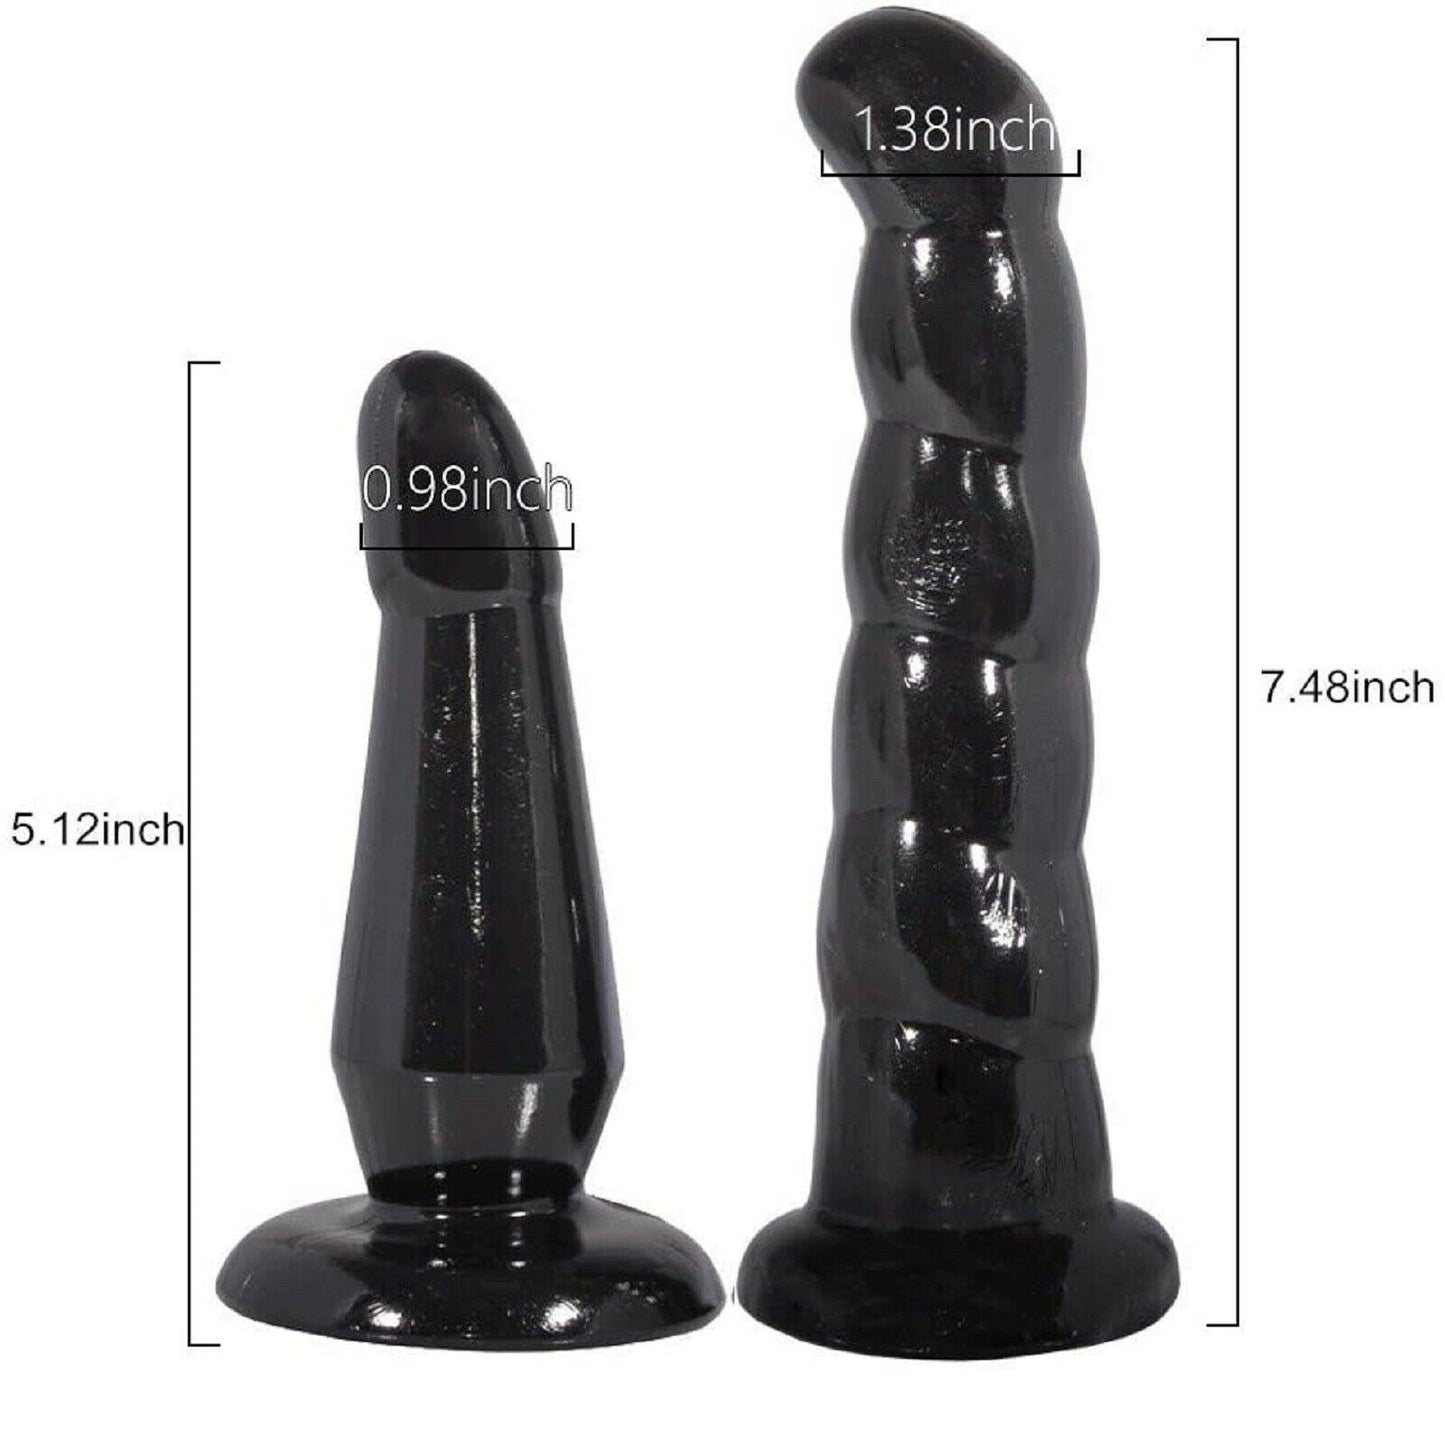 Wearable Double Dildo Strap On Harness Lesbian Couples Dong Gay Adult Sex Toy